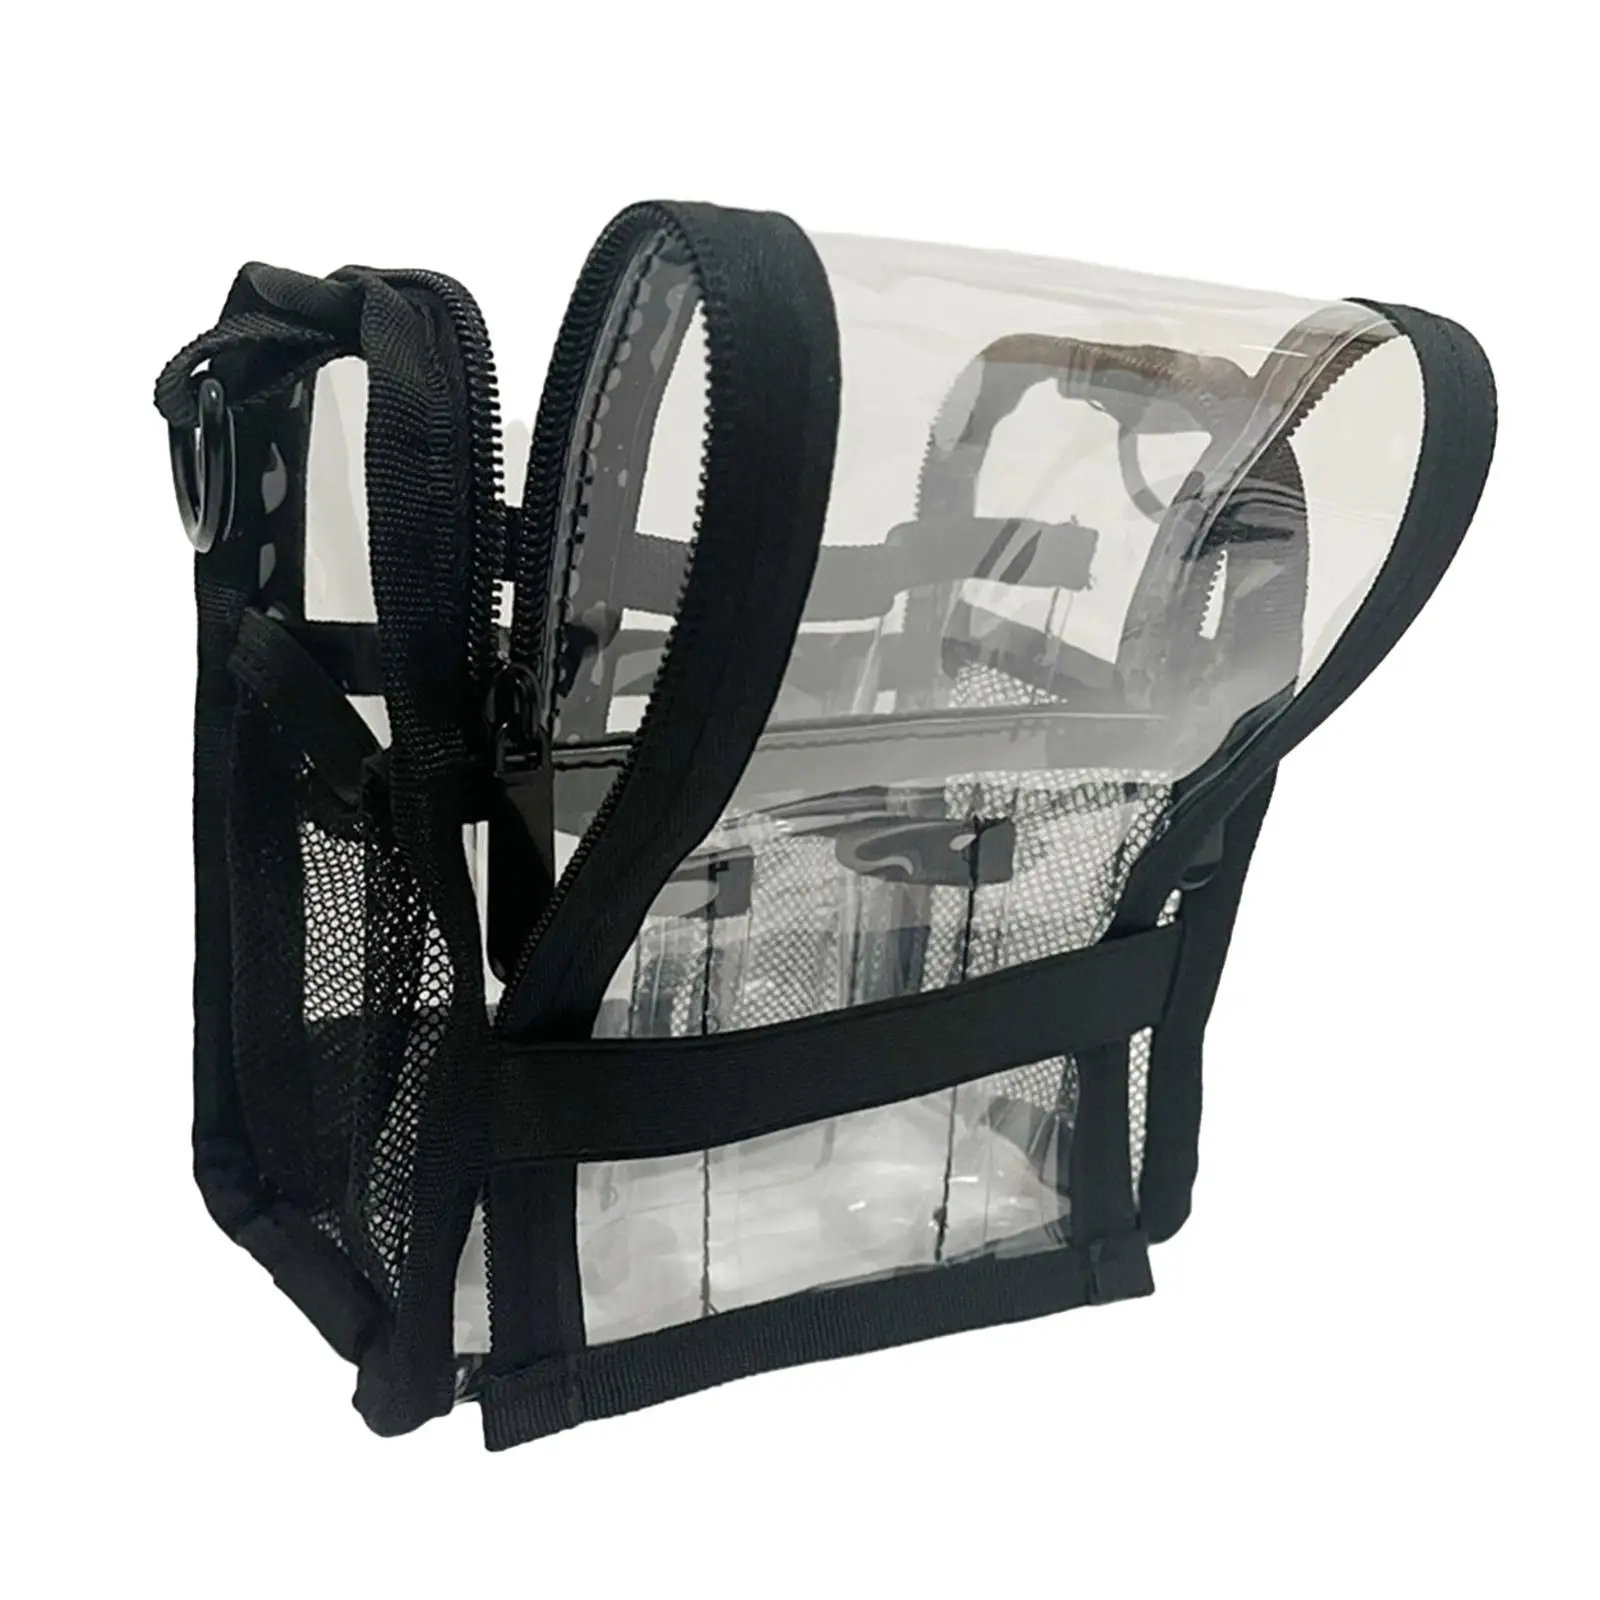 Clear Toiletry Bag Large Clear Makeup Bag Professional Travel Cosmetic Bag, Makeup Artists Bag for Bathroom Office Home